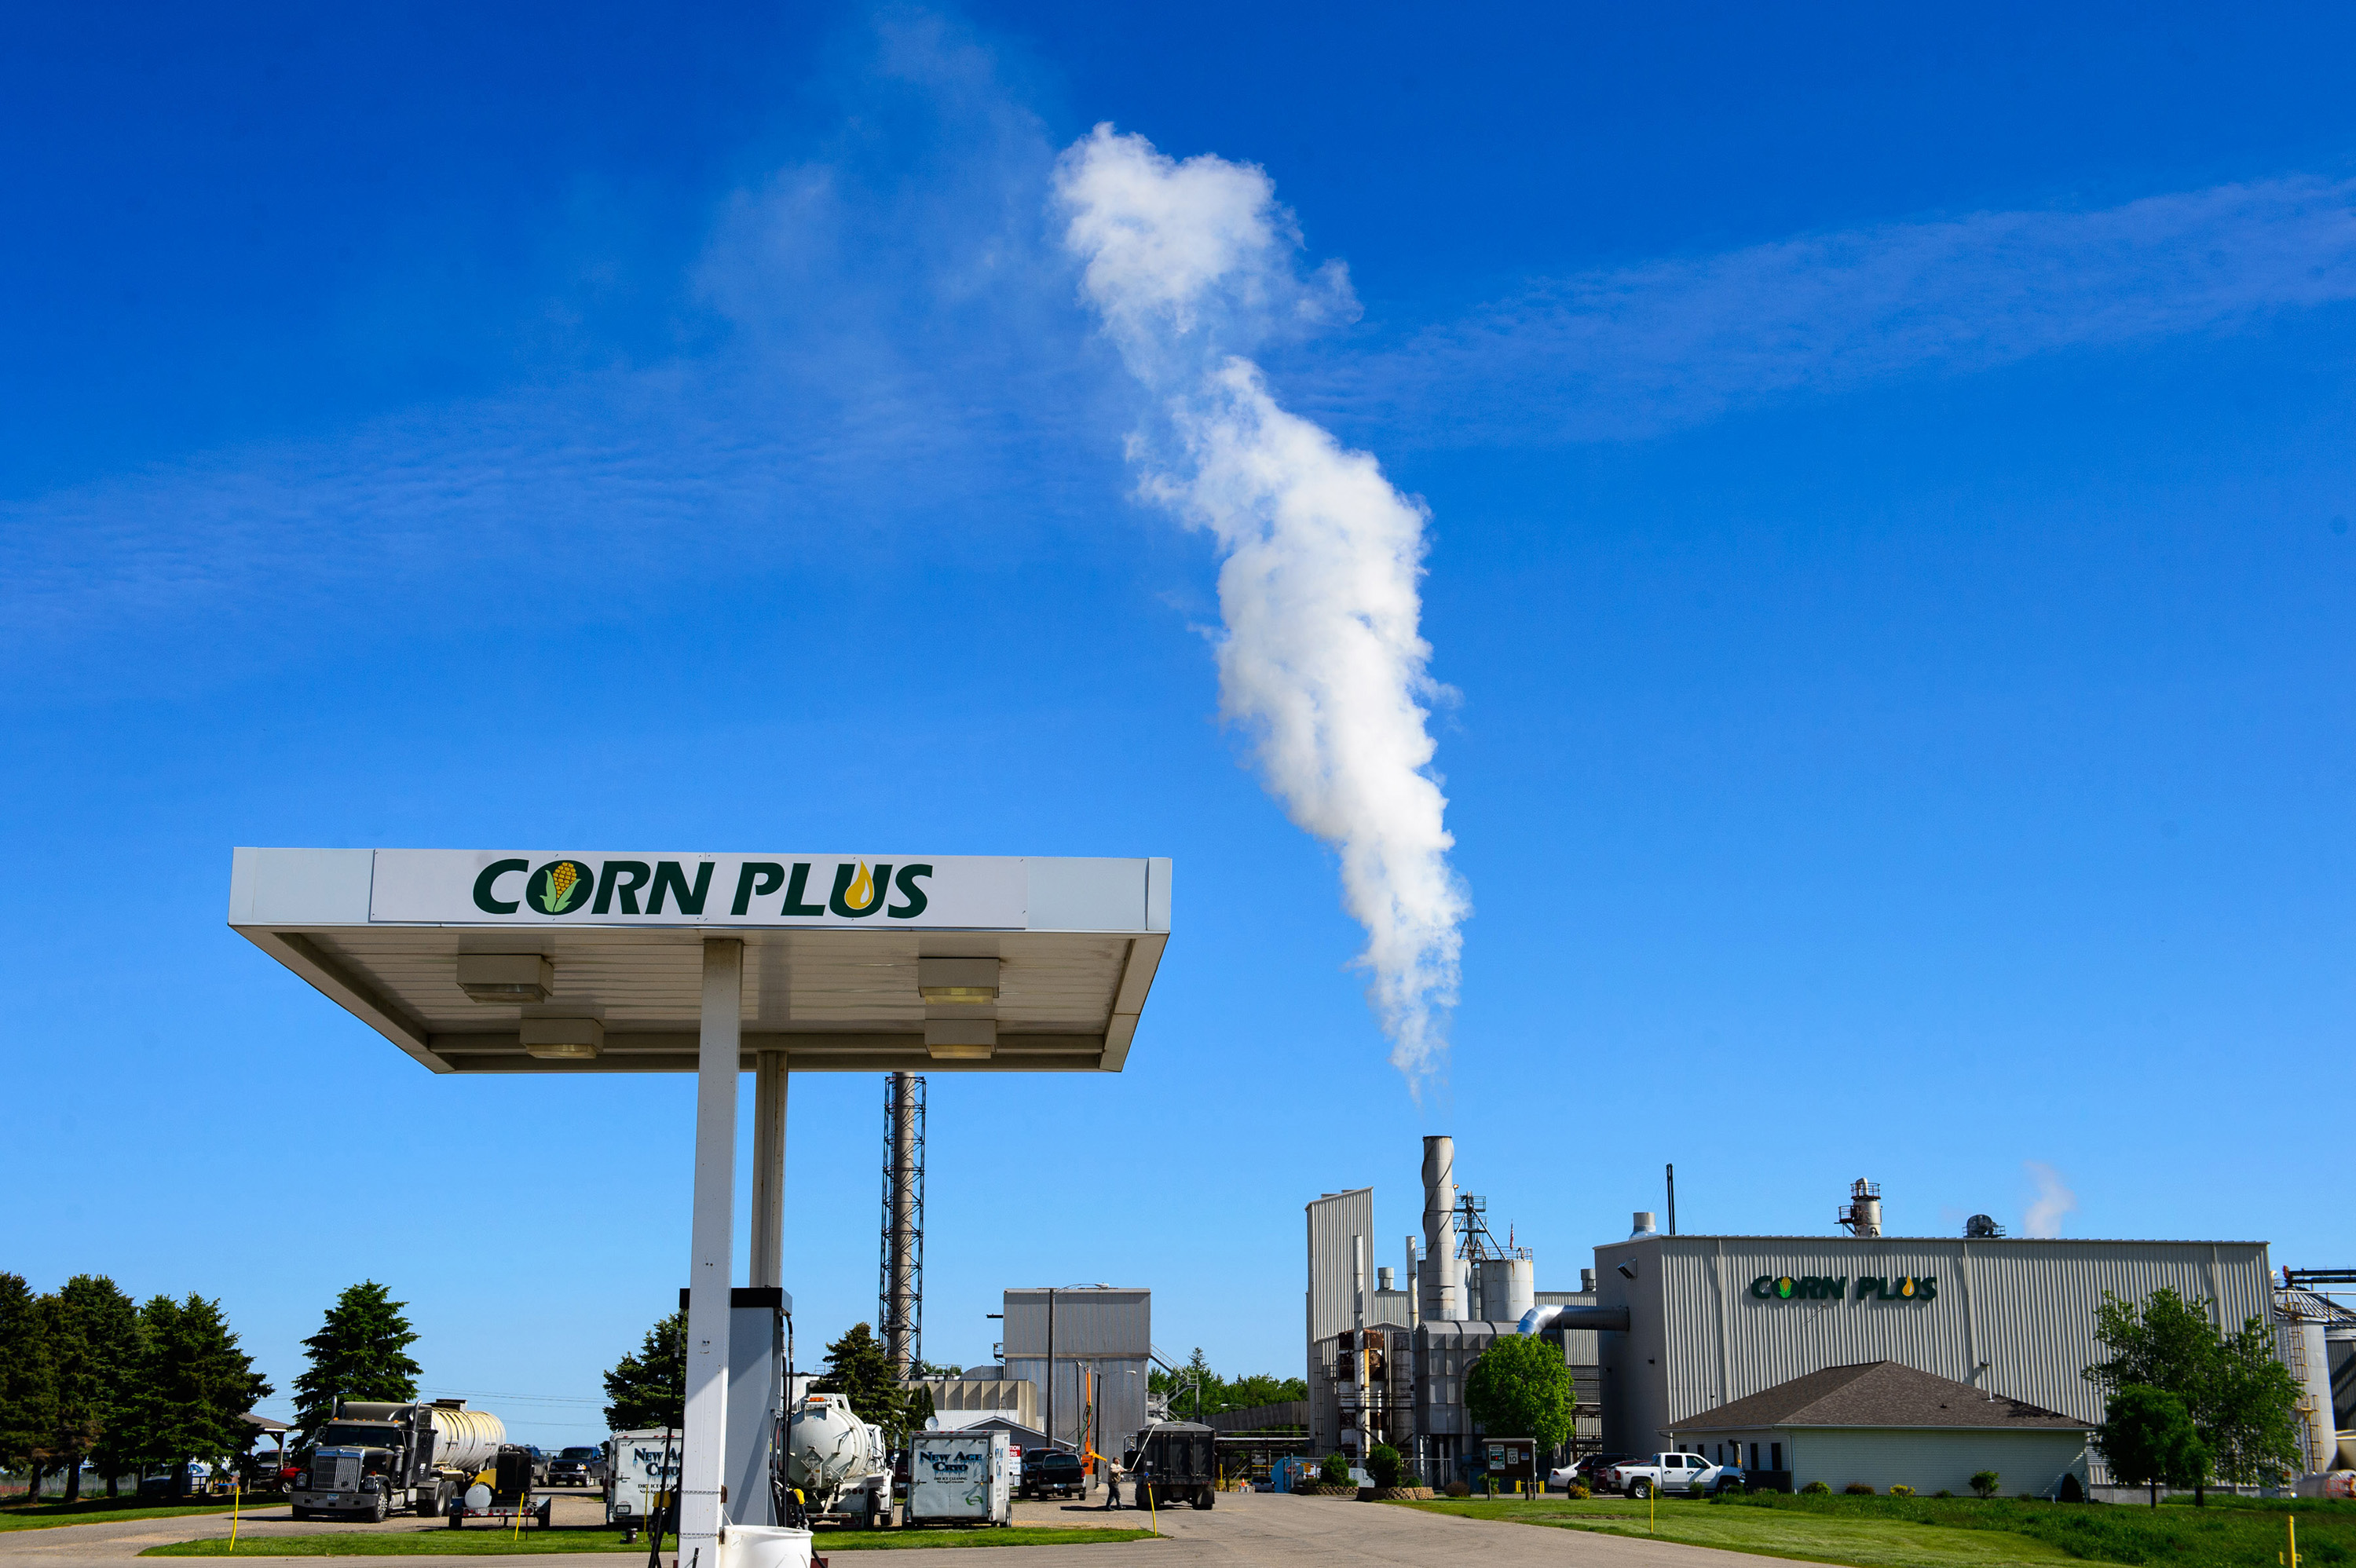 With Sonny Perdue nominated, an ethanol argument jumps up